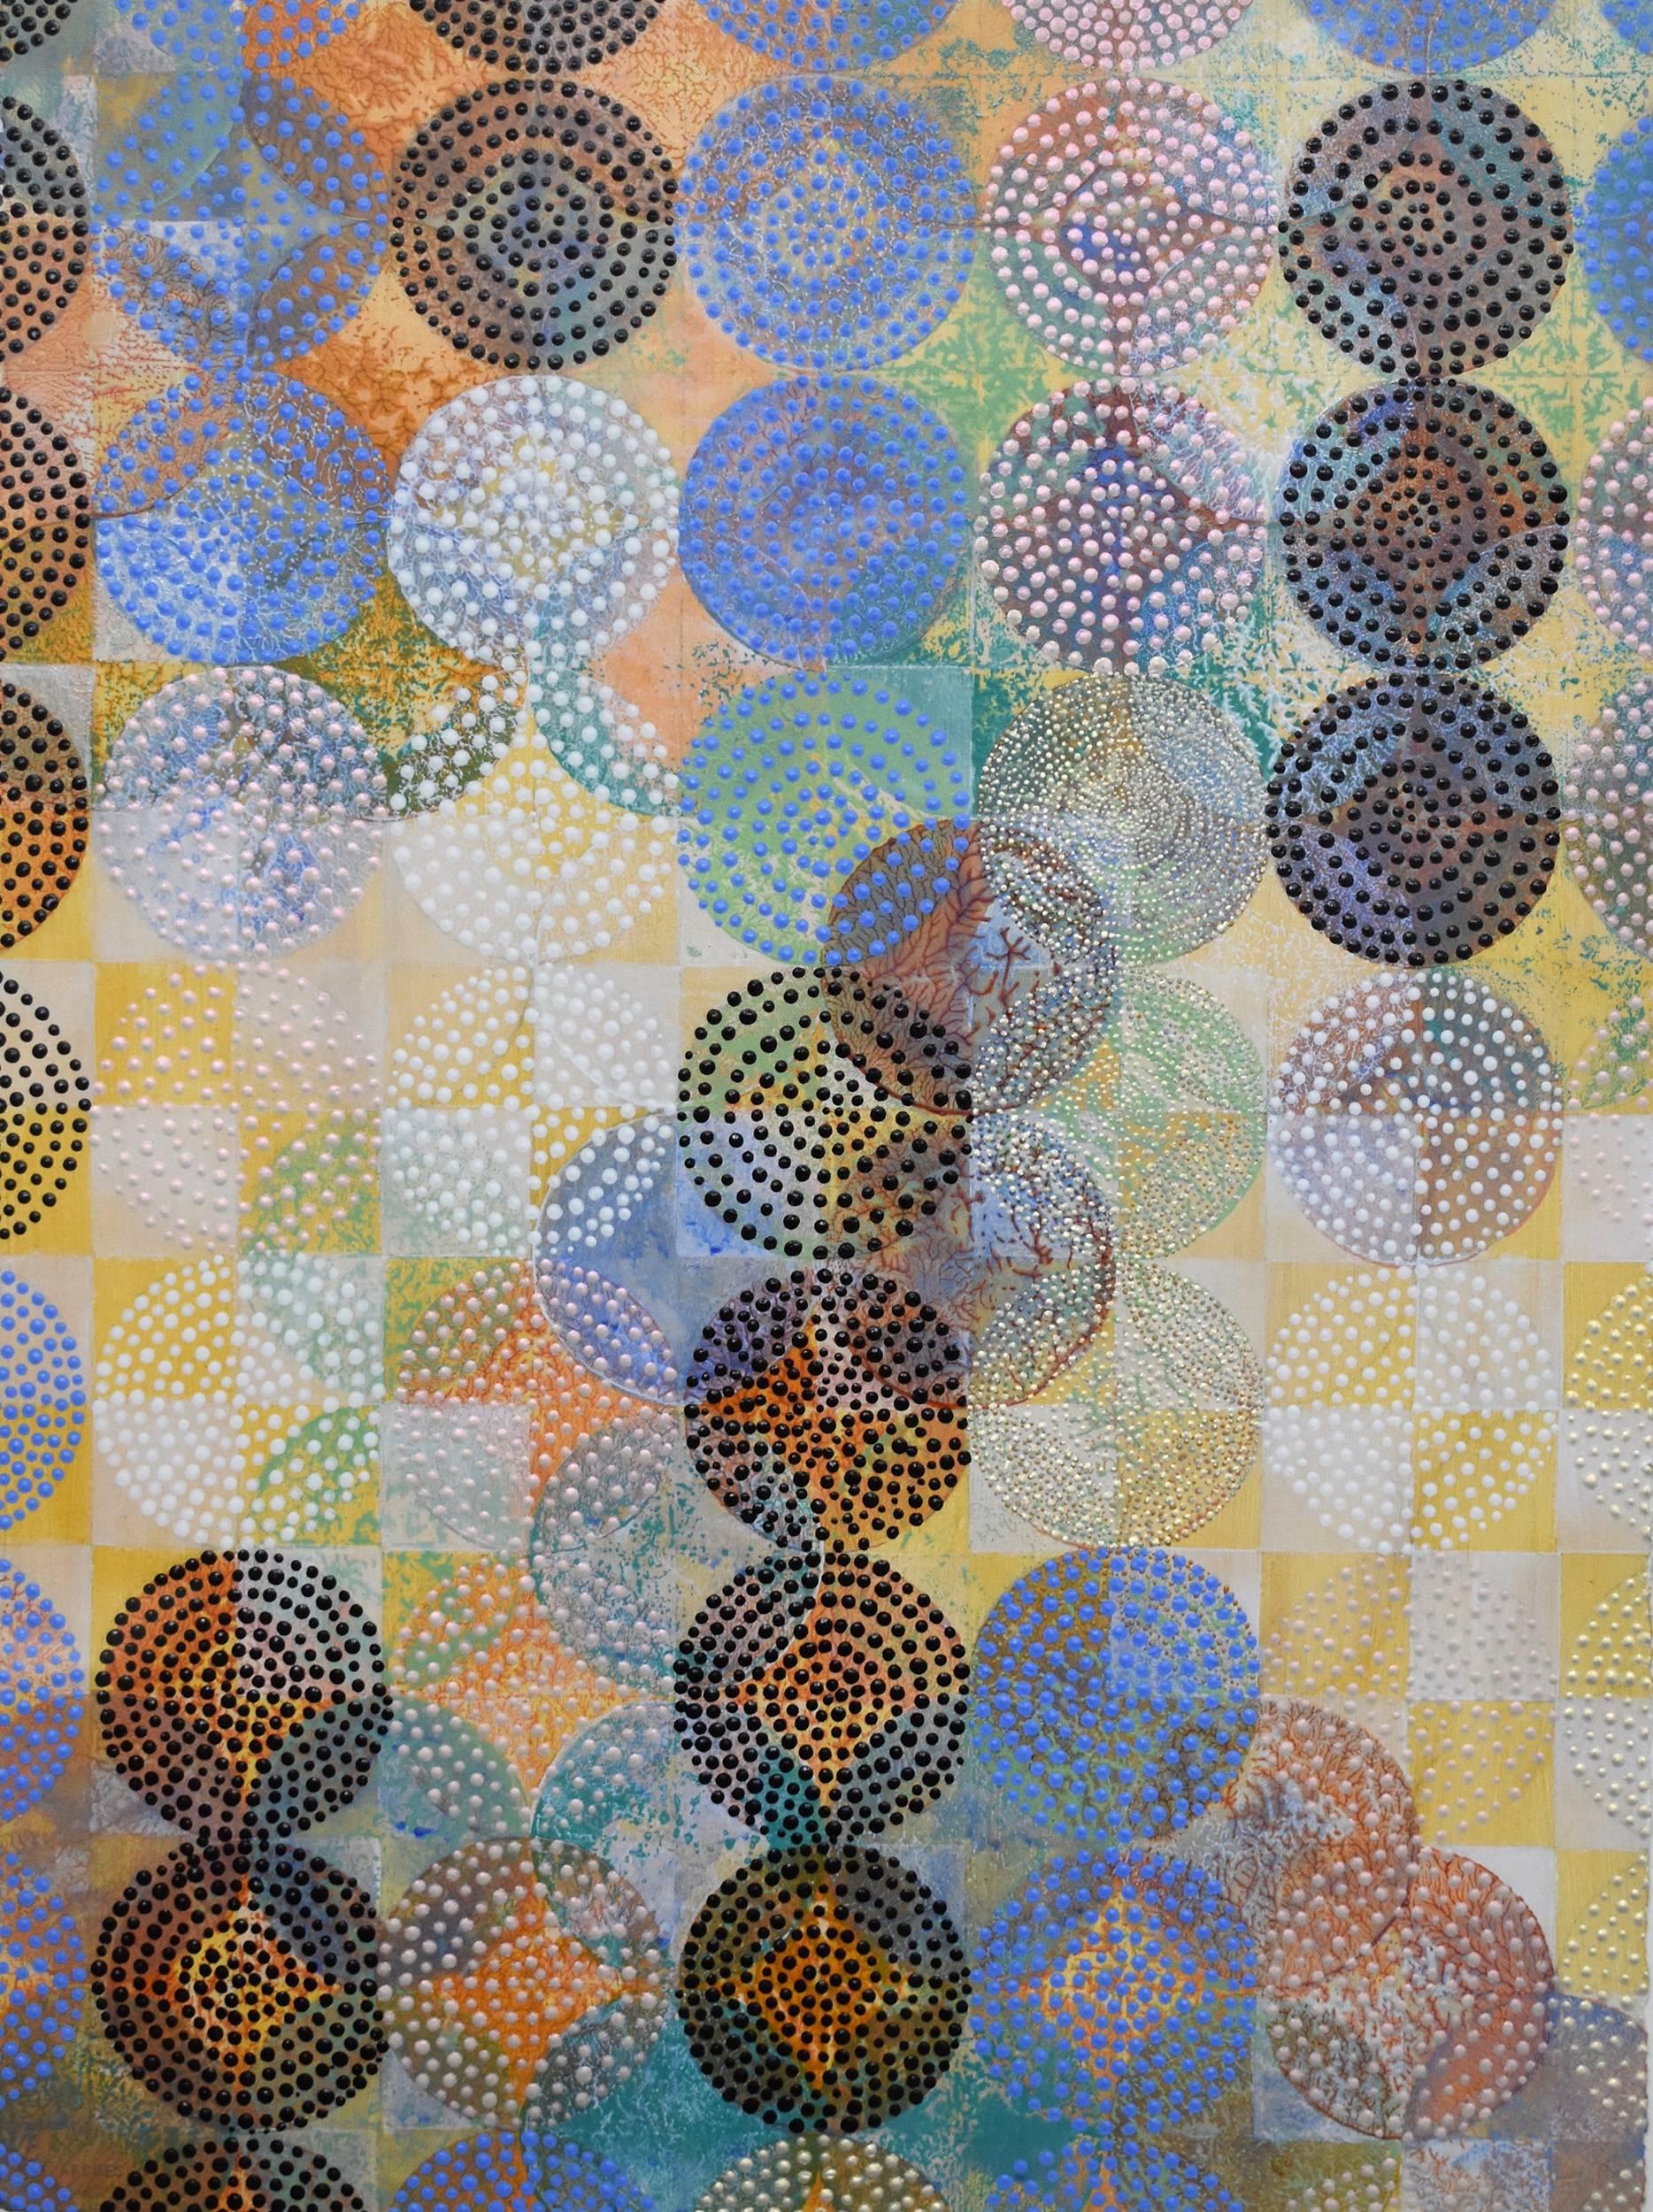 Denise Driscoll Abstract Painting - "Circles 7", abstract, acrylic painting, squares, yellows, greens, blues, dots